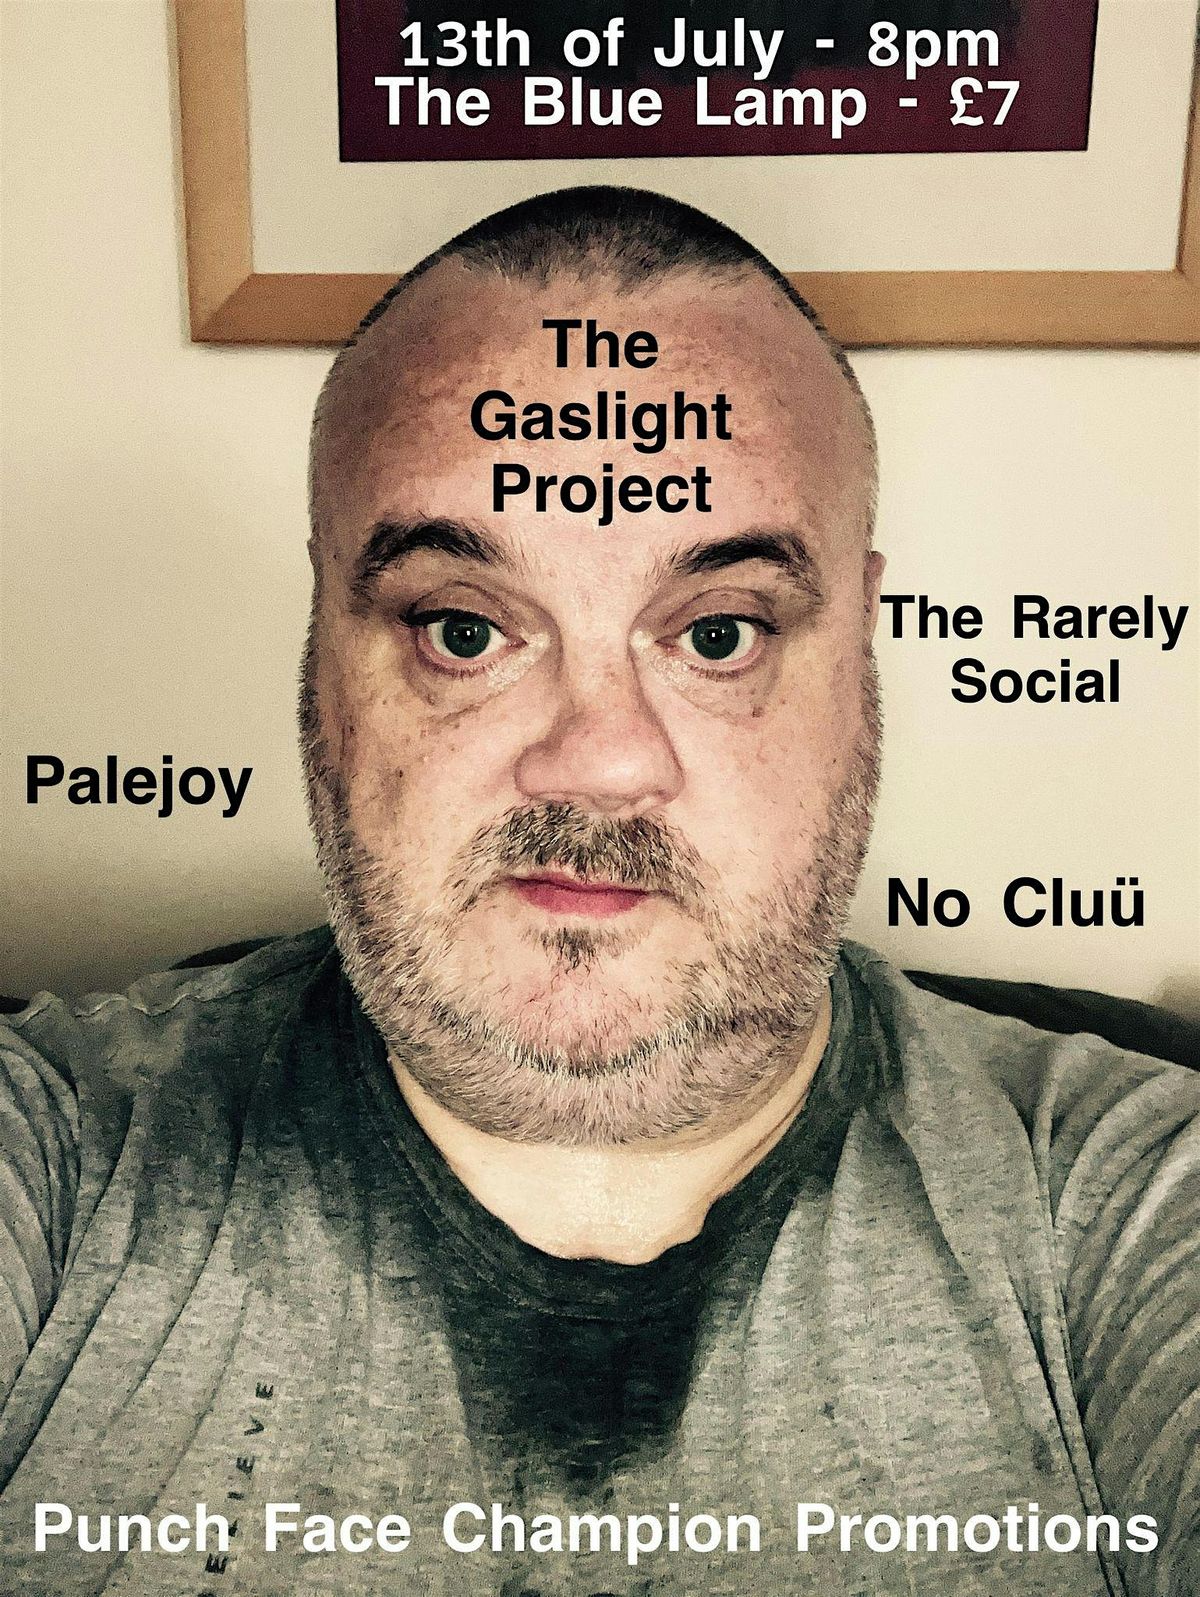 PFC Promotions - The Gaslight Project\/The Rarely Social\/Palejoy\/No Clu\u00fc